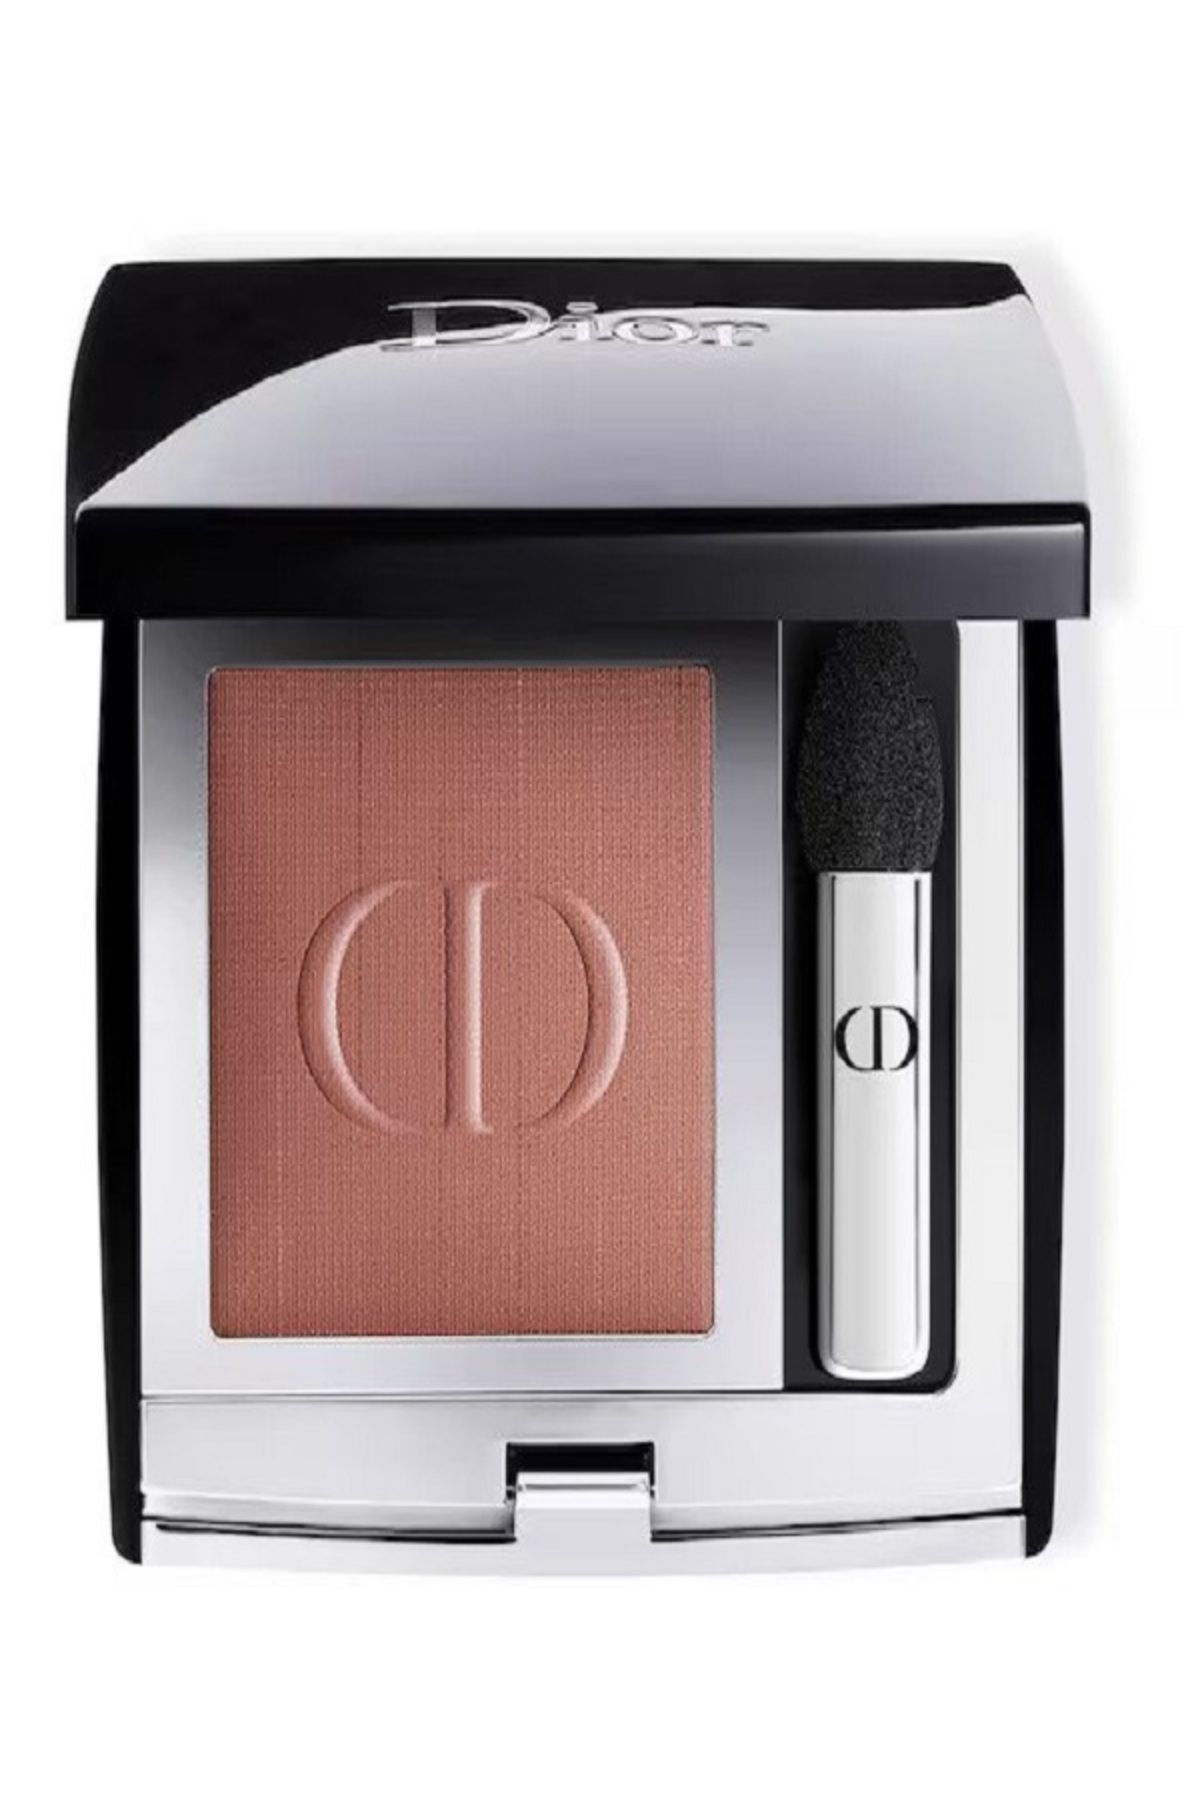 Dior MONO COULEUR COUTURE - EYE SHADOW ENRİCHED WİTH ALOE VERA AND PİNE OİL 2 GR PSSN2084